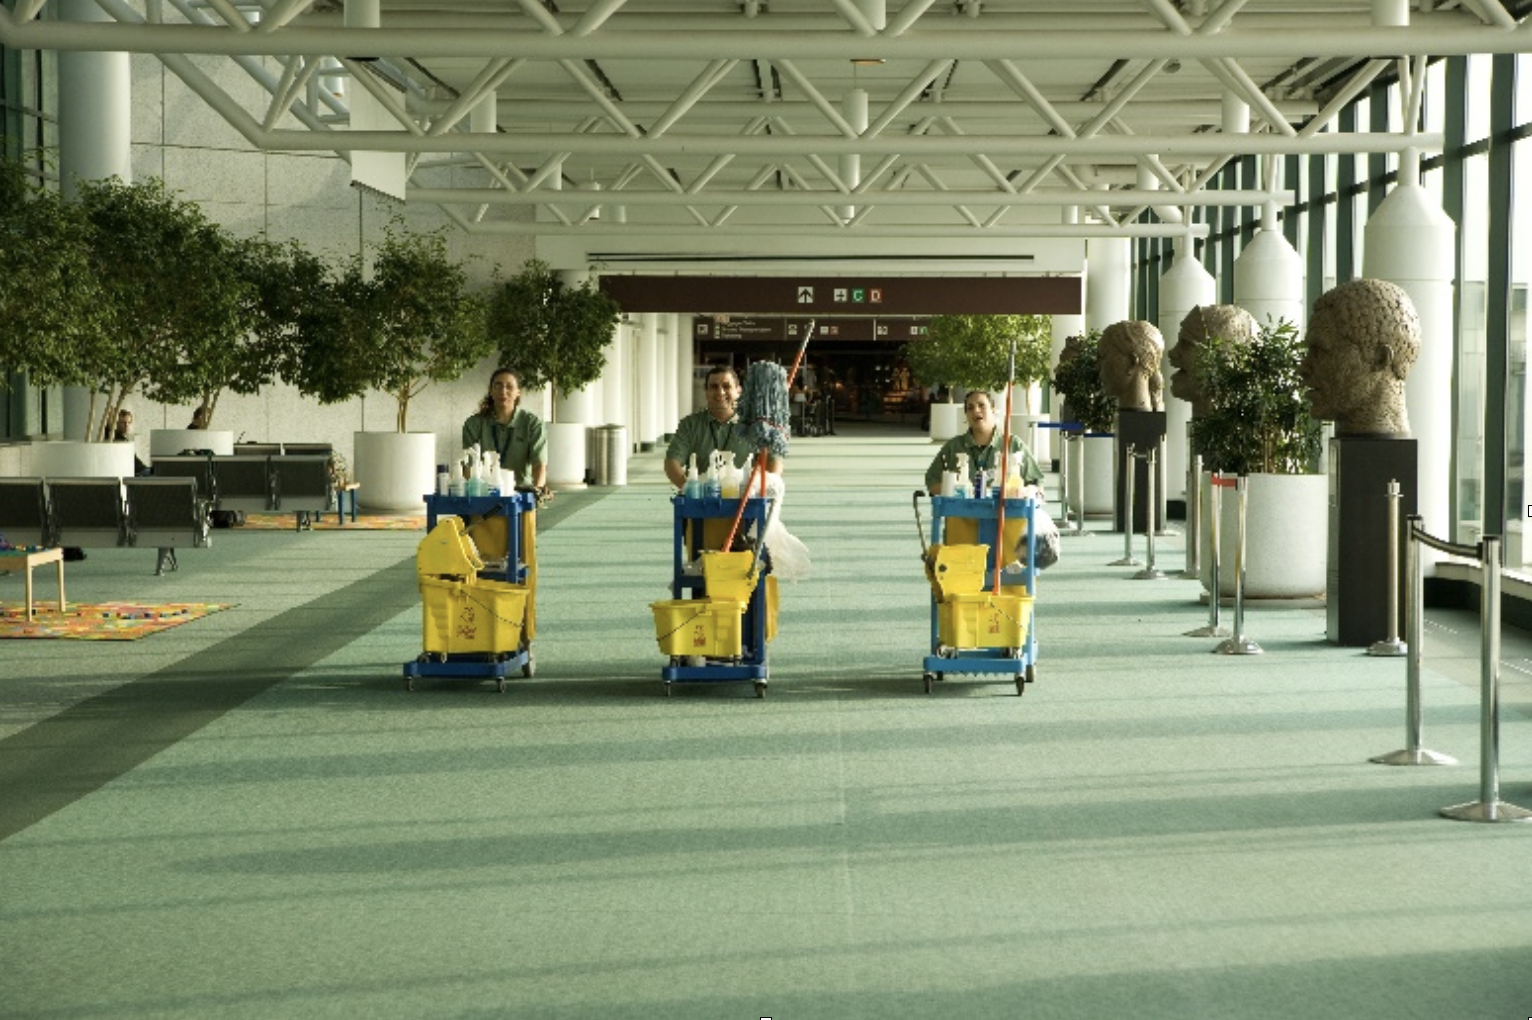 Conscientious janitors are key to a sparkling airport